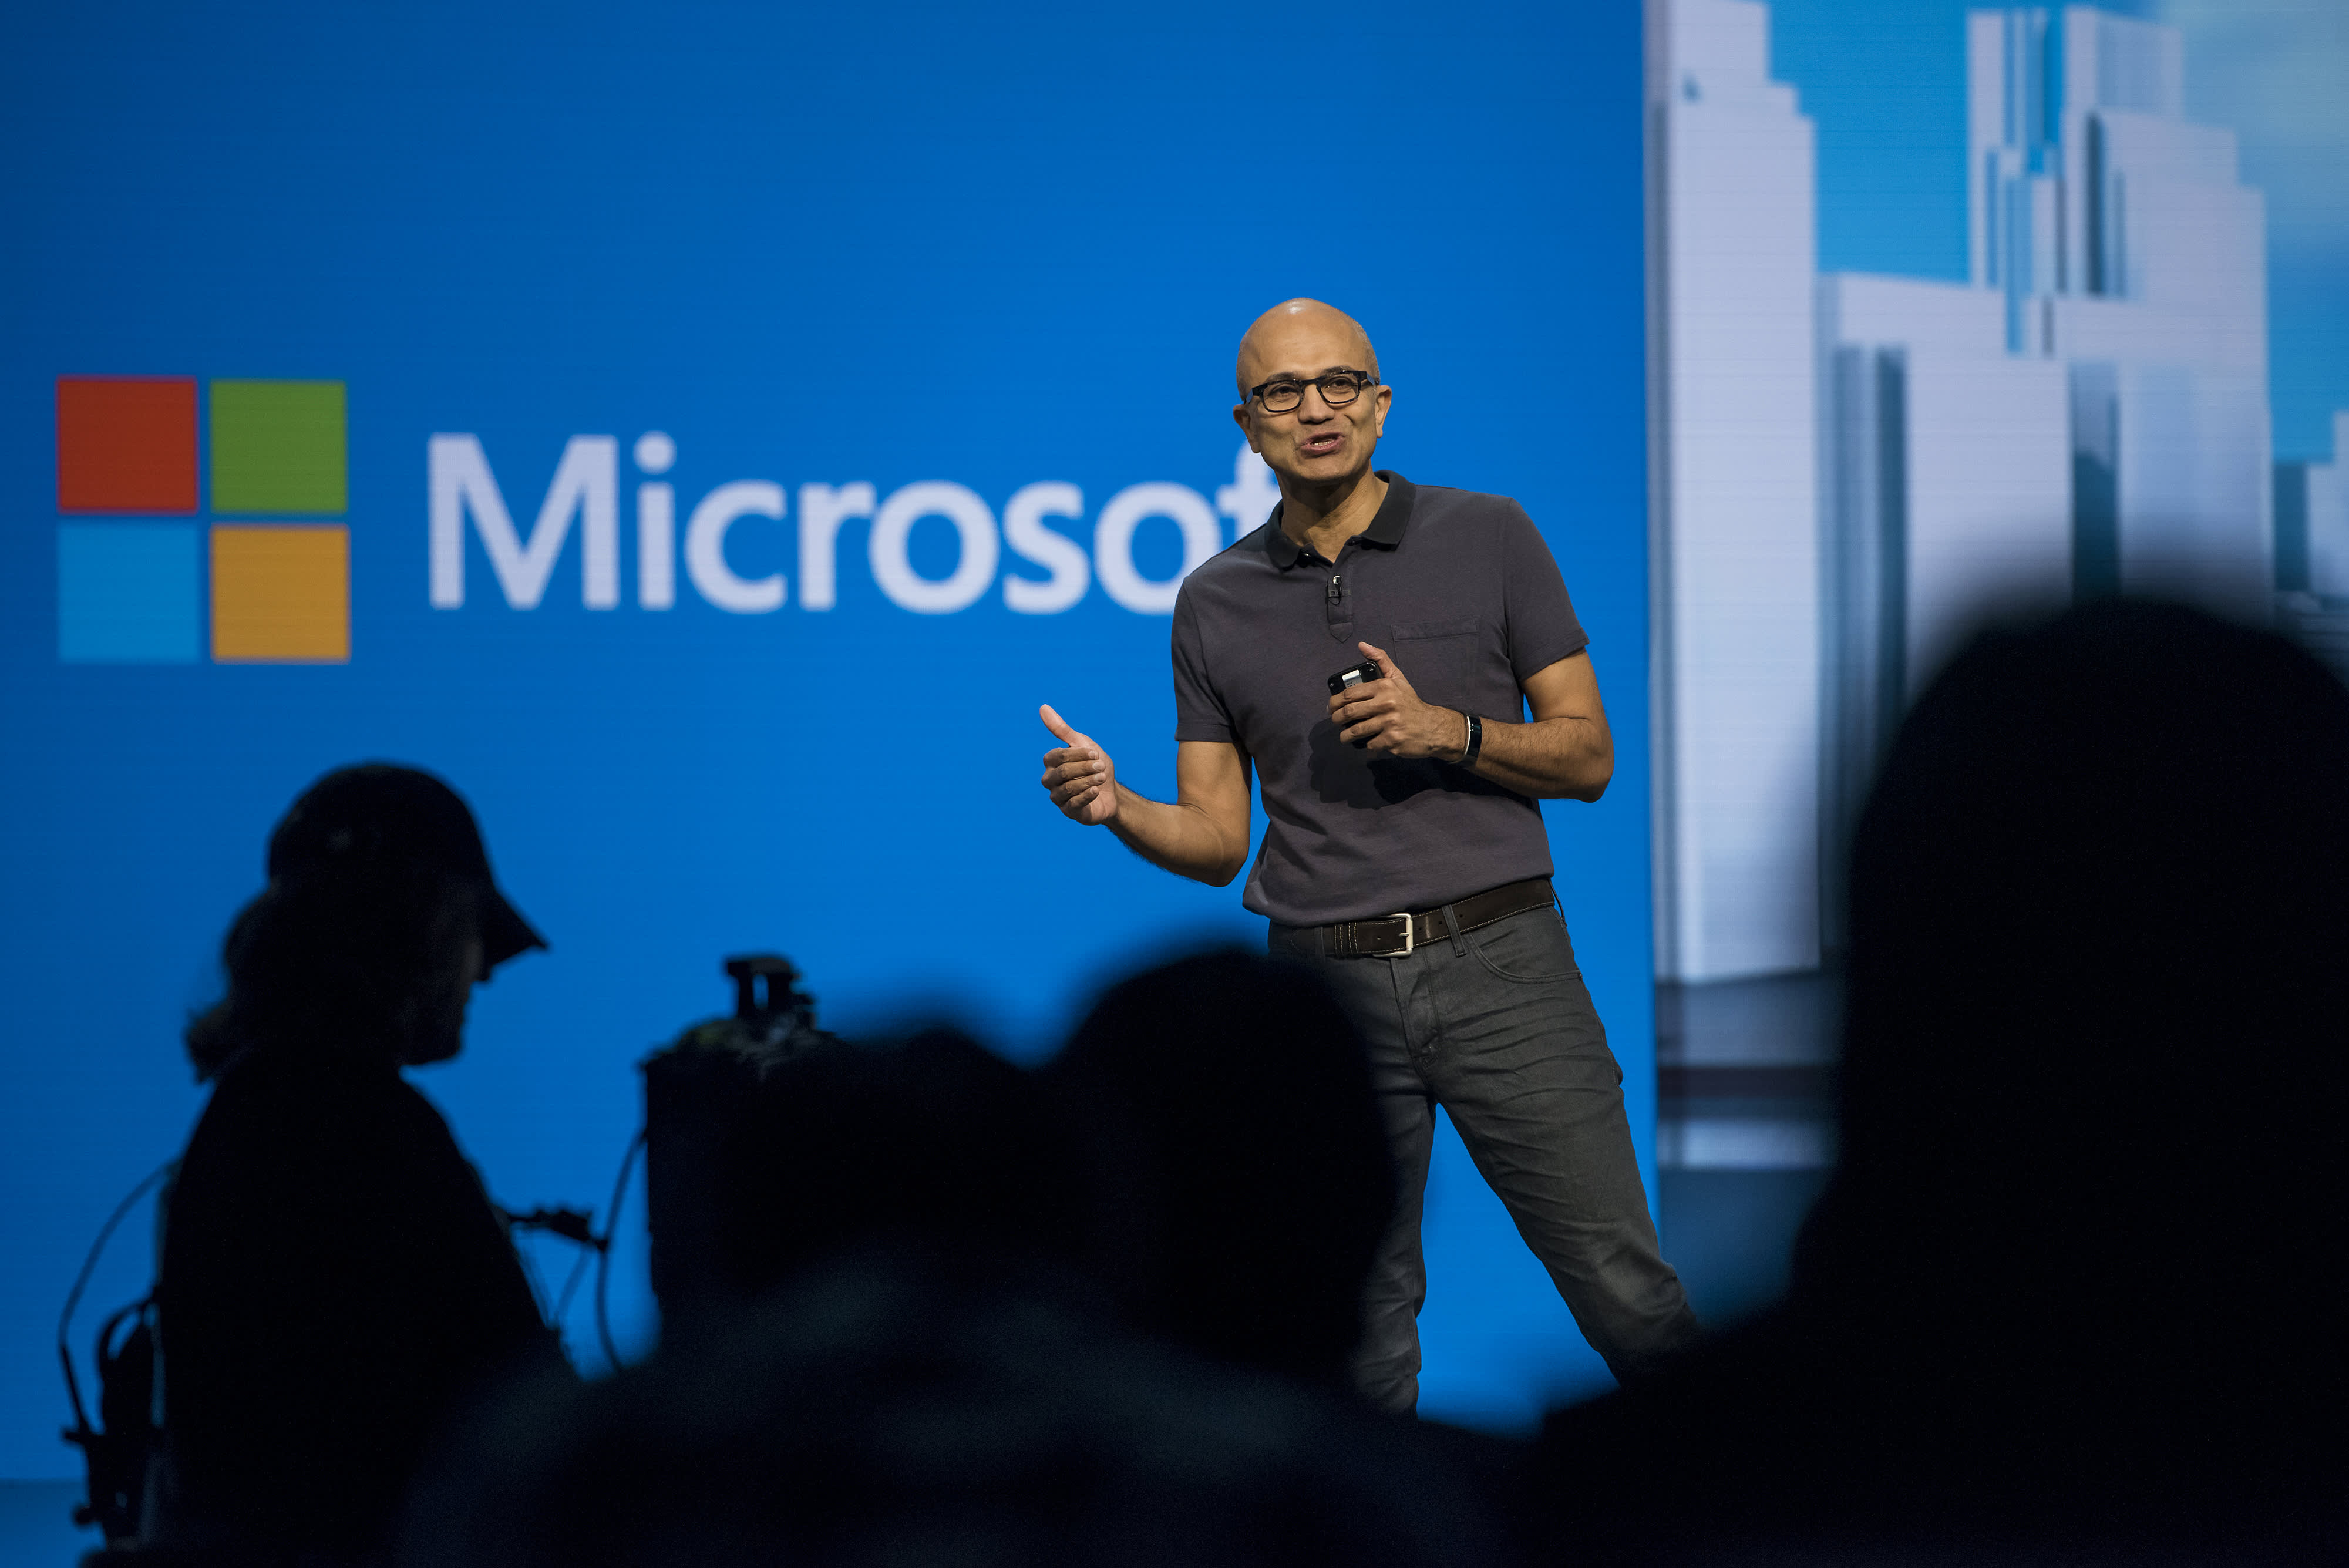 Microsoft's post-earnings stock moves reinforce a key Club investing rule 